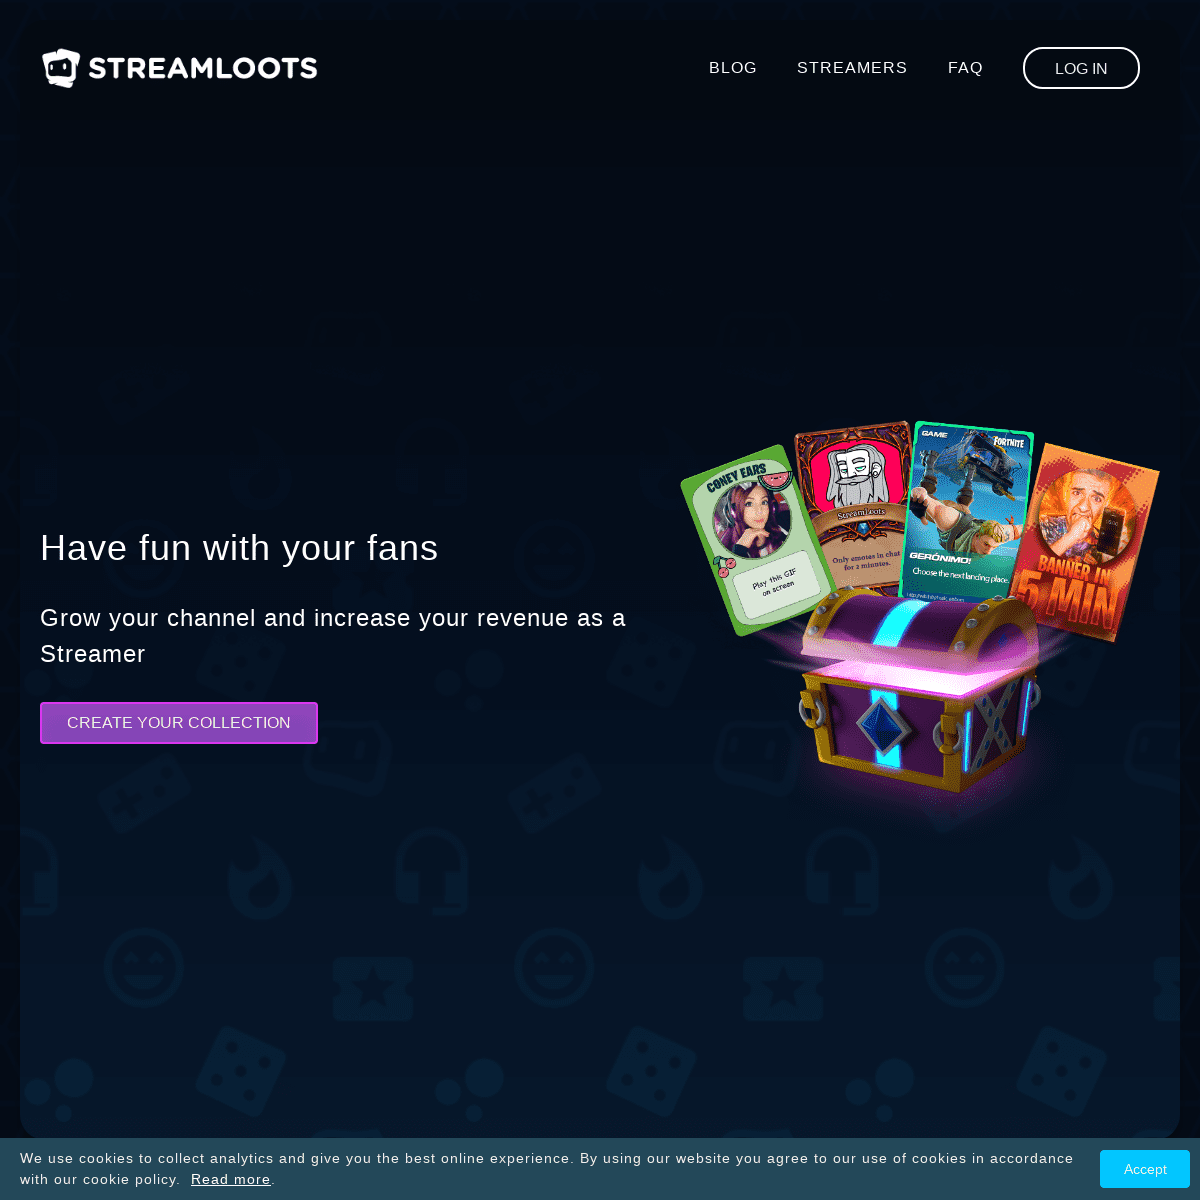 Streamloots - Have fun with your fans